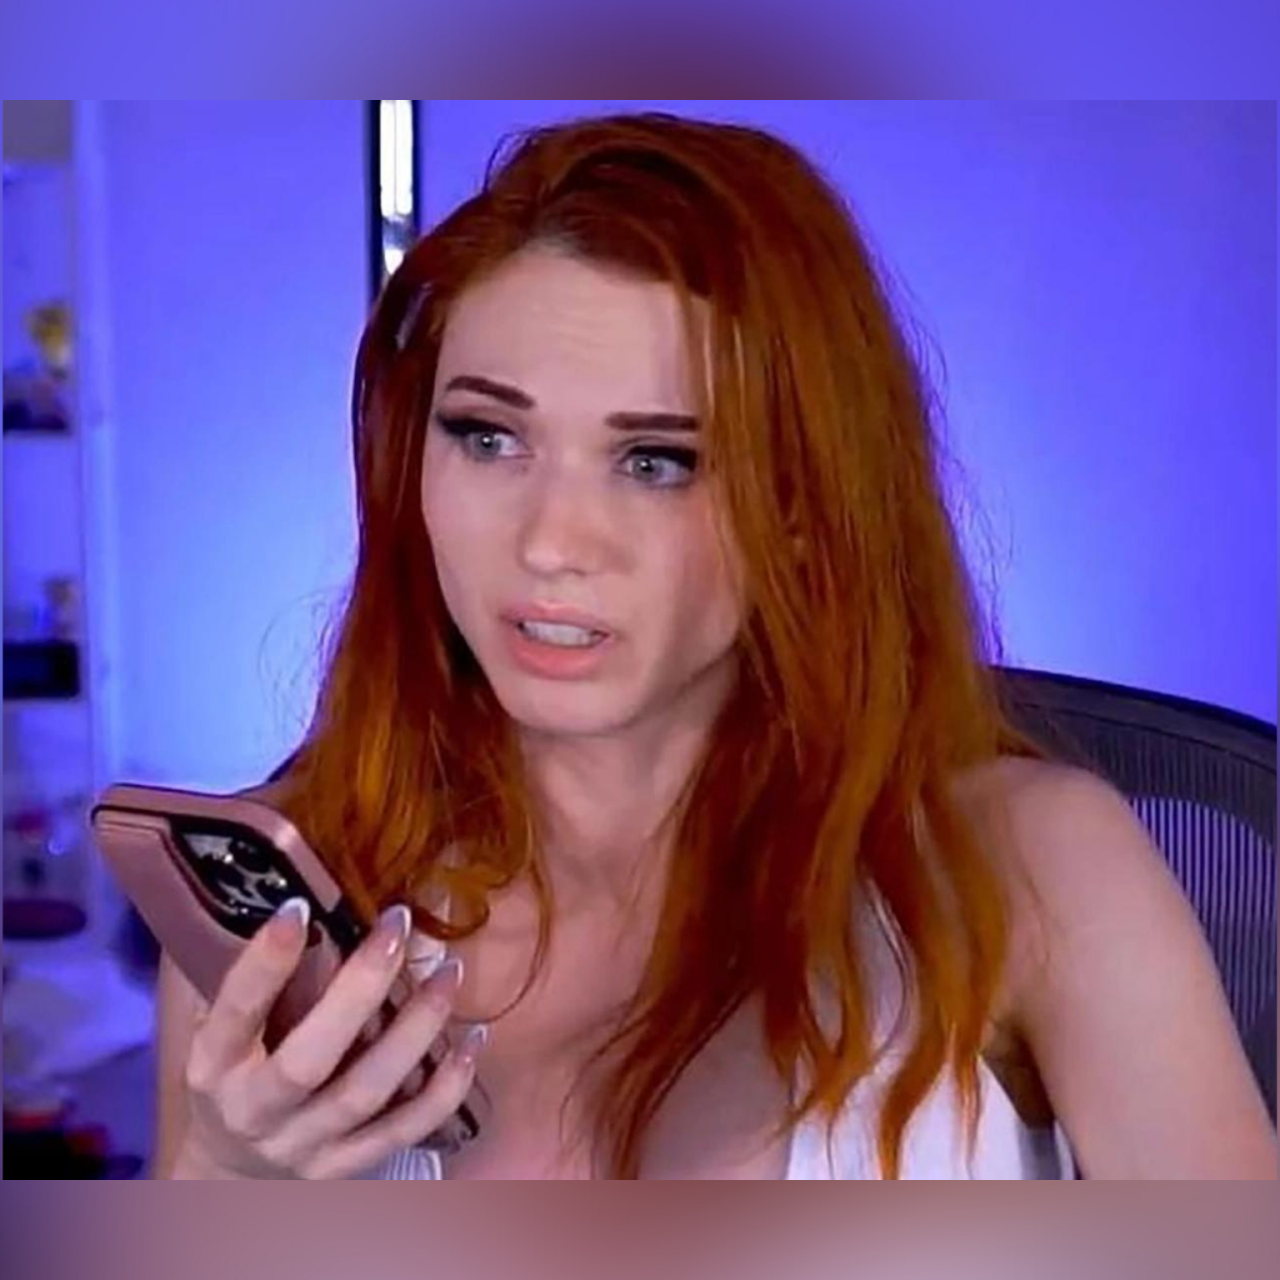 Twitch streamer explains why getting a boyfriend would make her